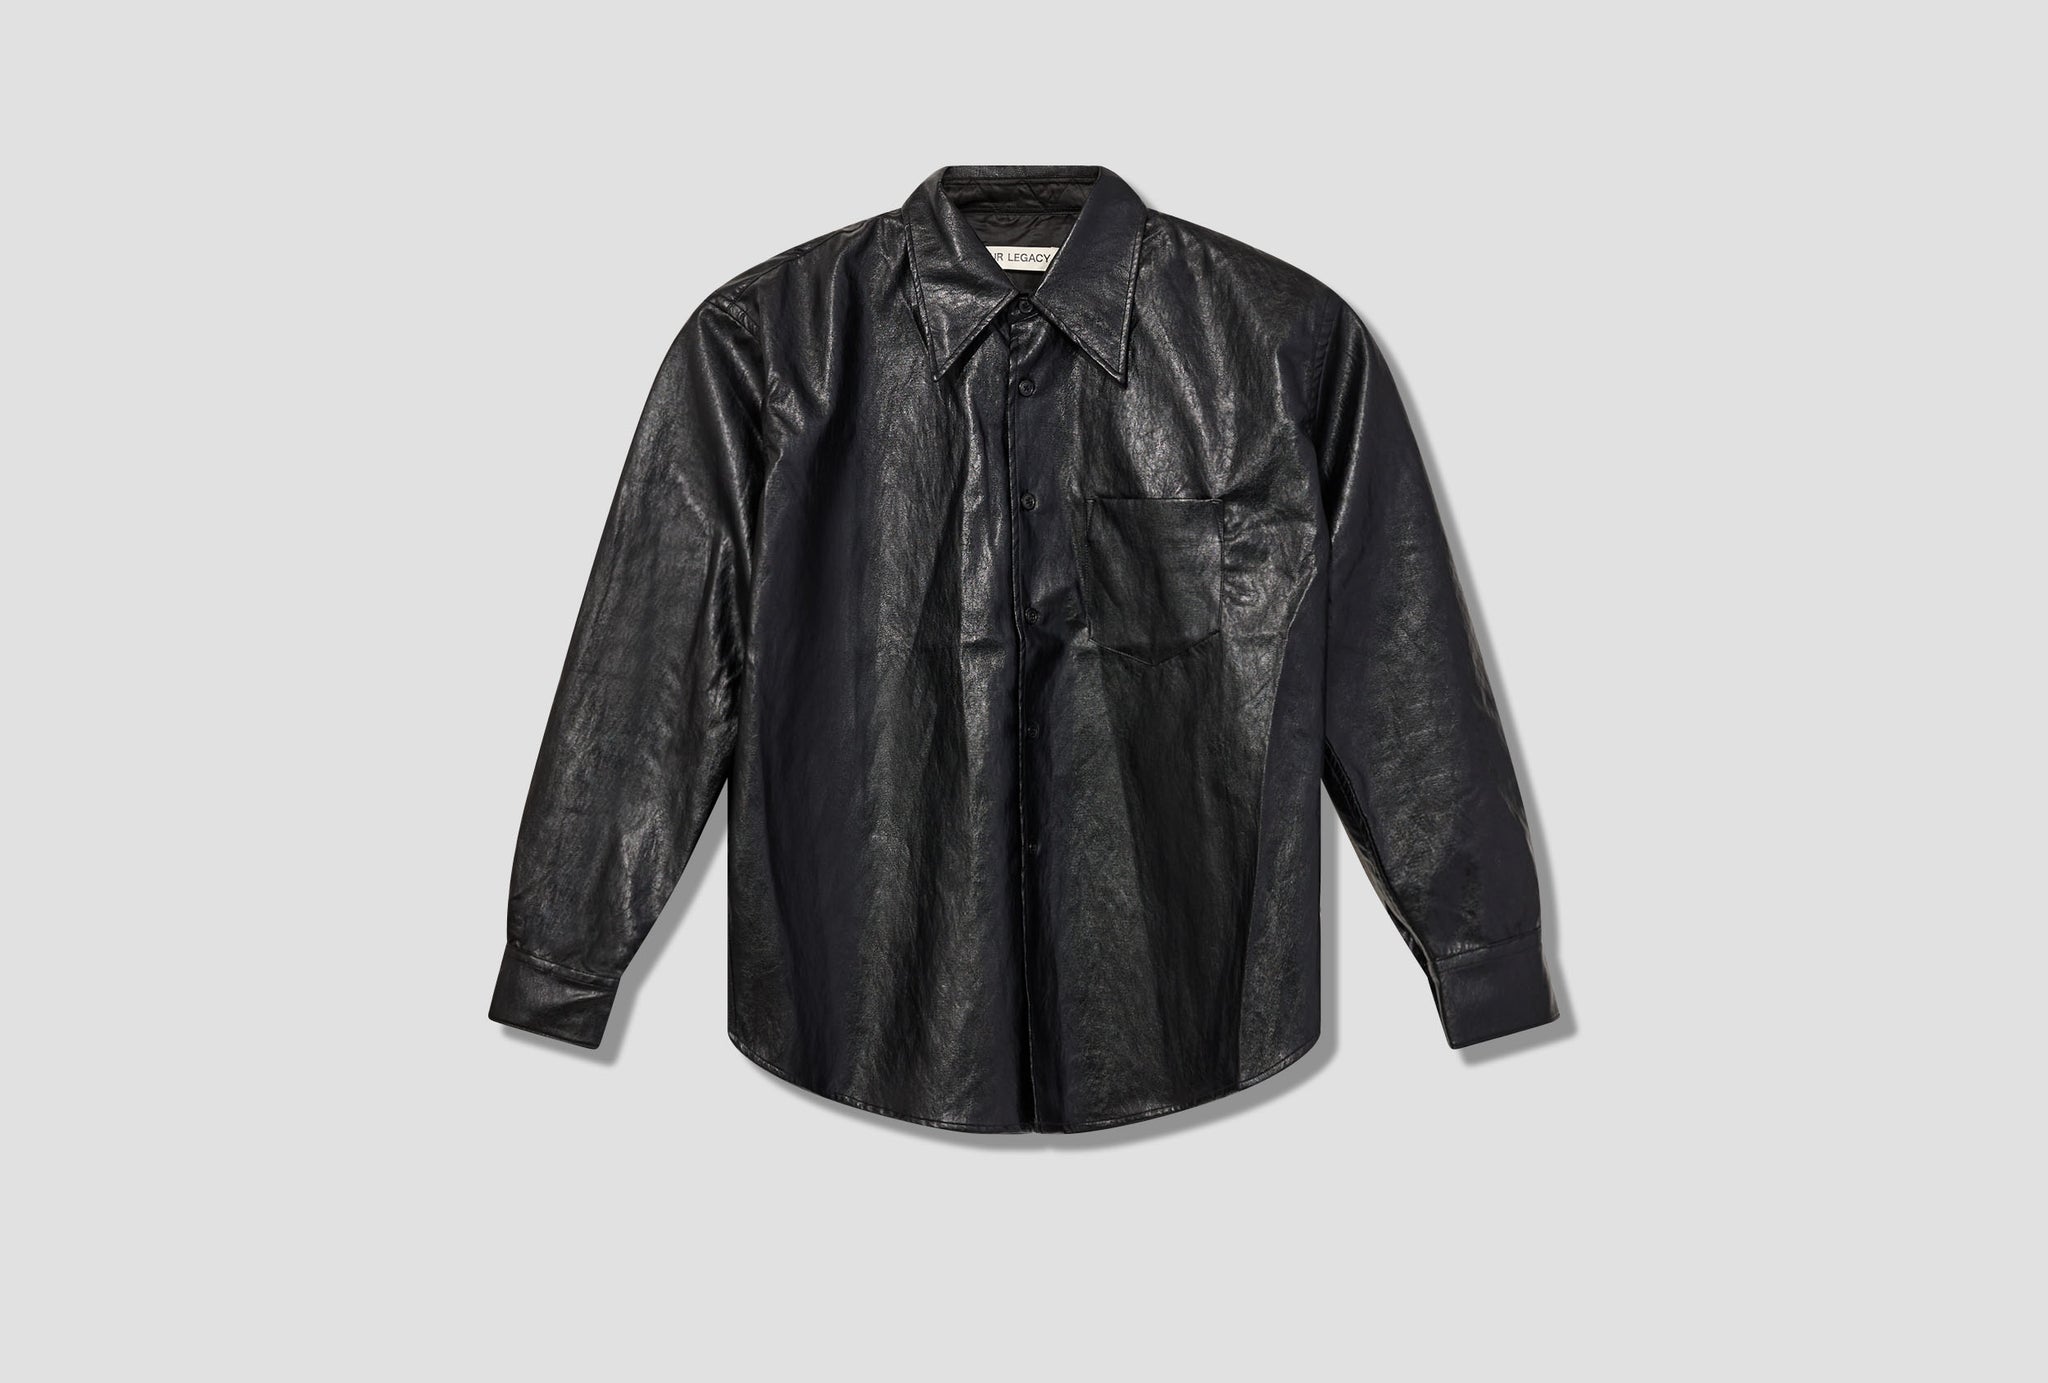 COCO 70S SHIRT - CAGEIAN BLACK FAKE LEATHER M4222CB Black